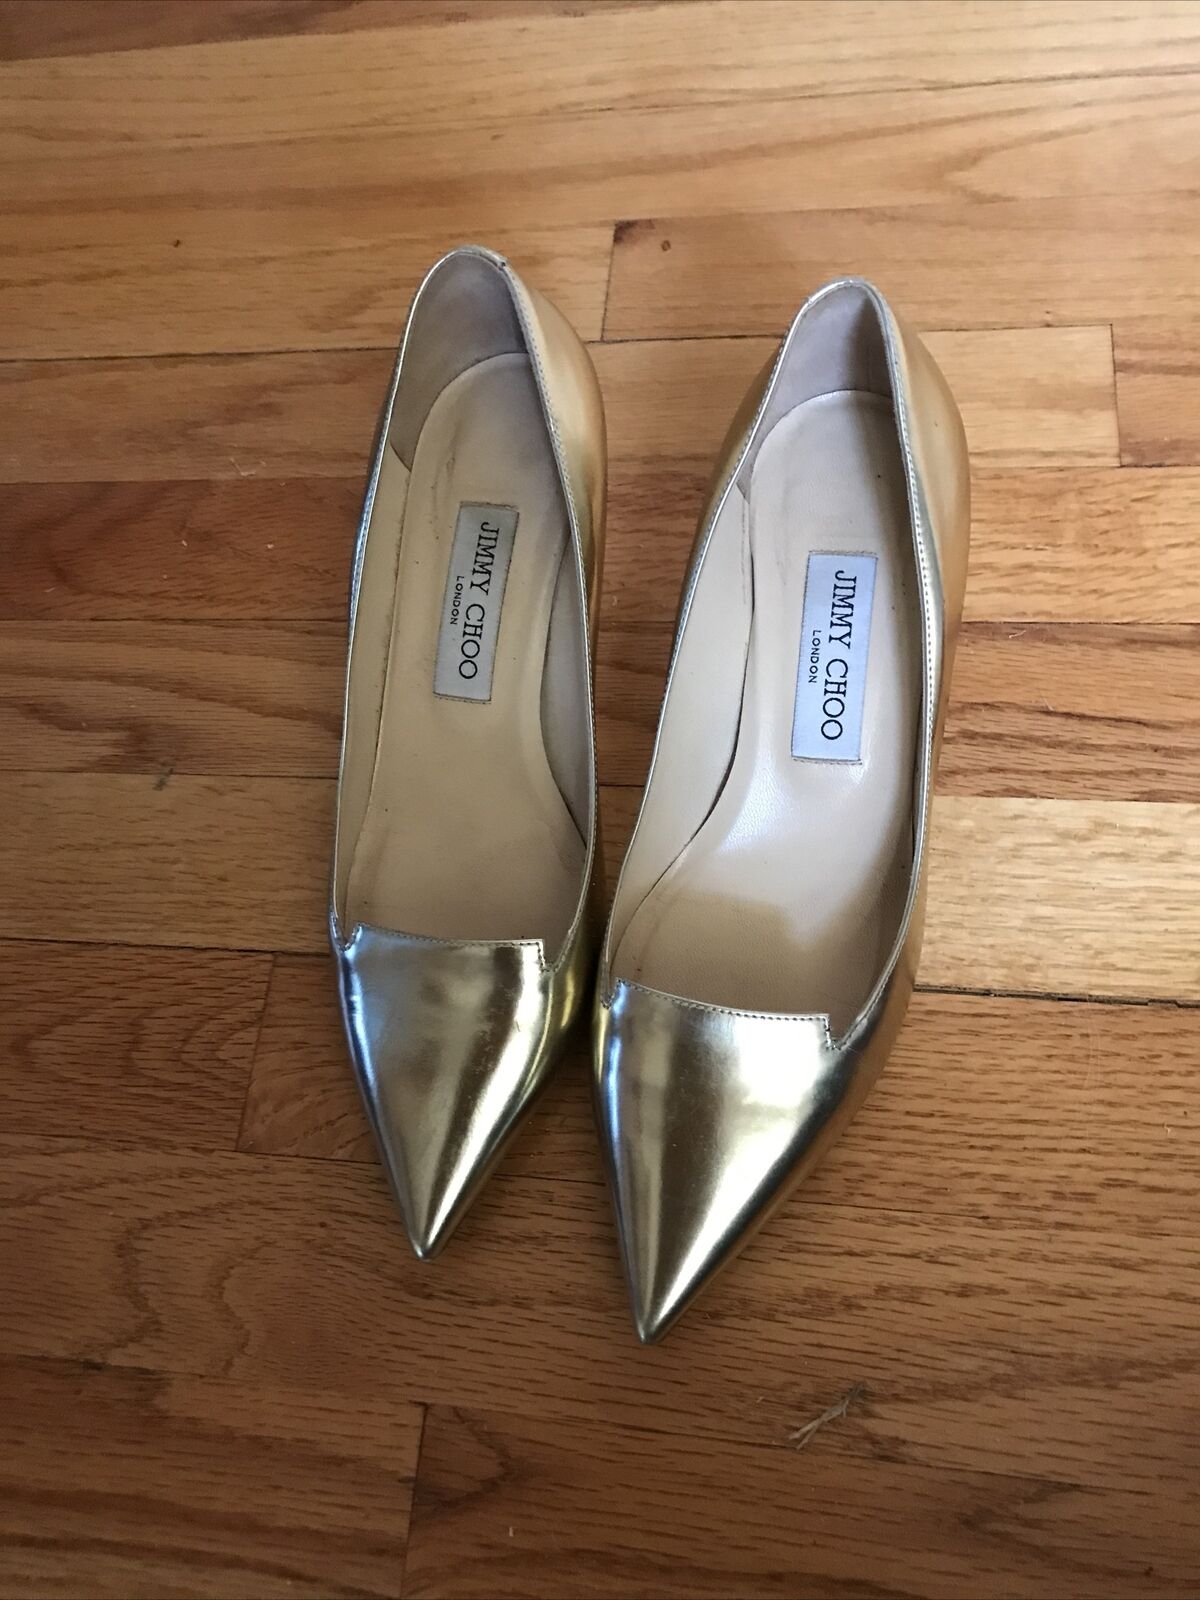 jimmy choo gold pumps 37.5 italy made in leather 